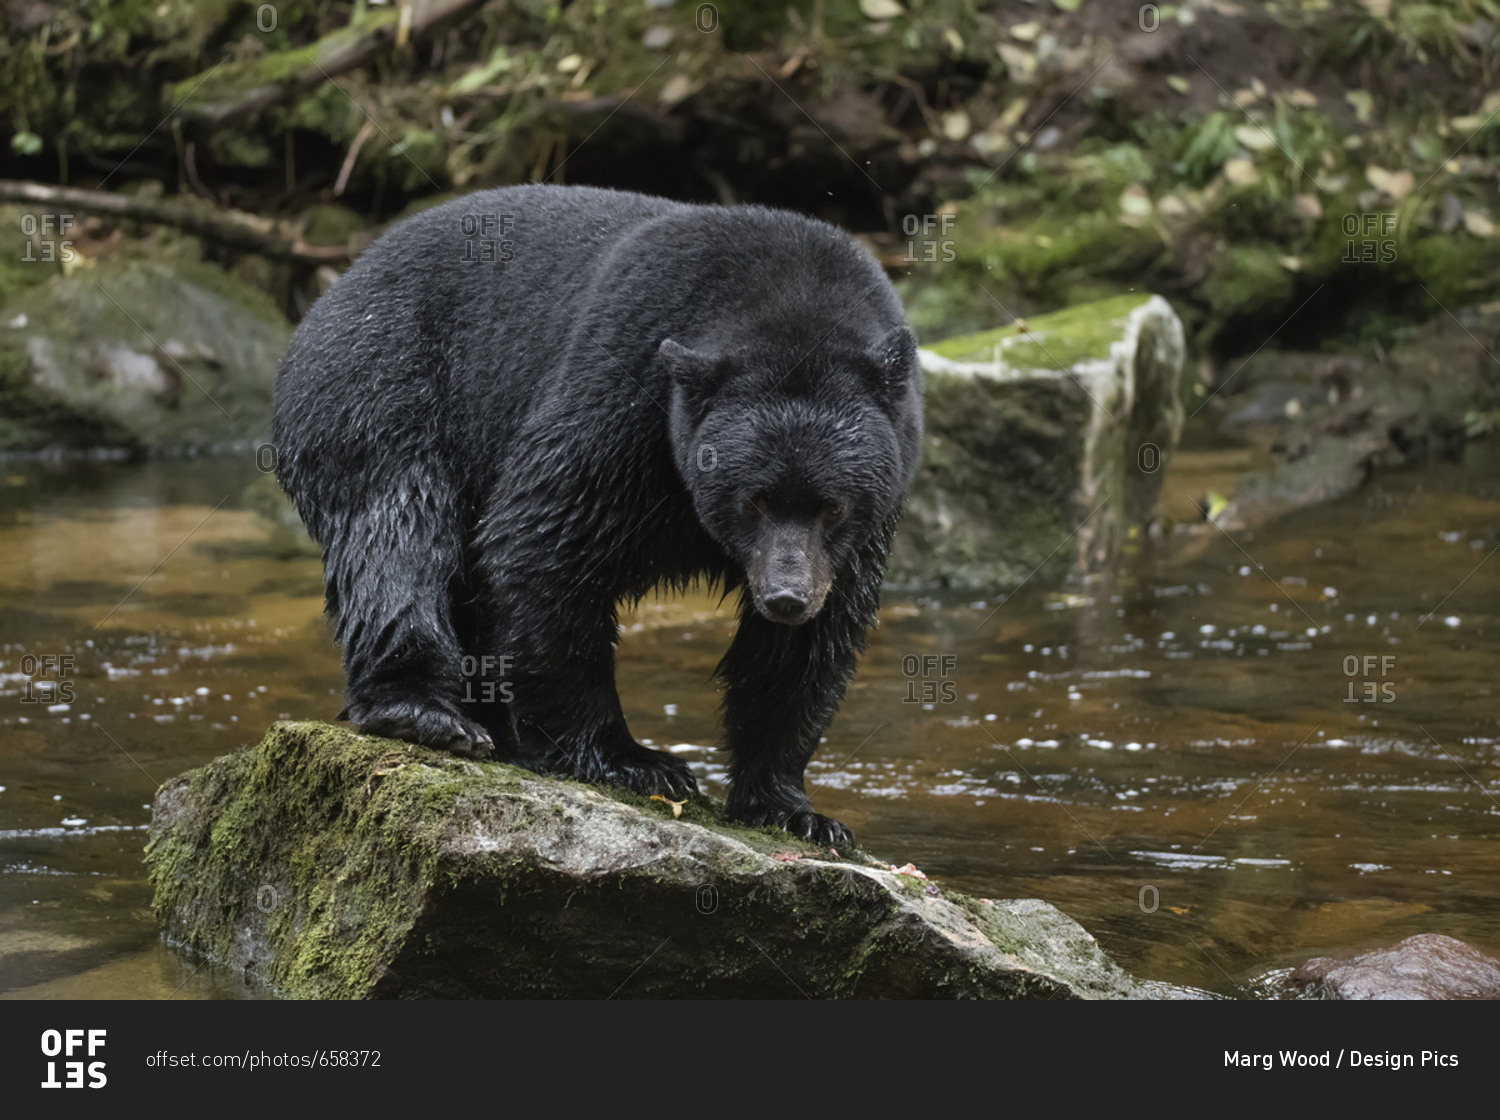 A Black Bear (Ursus americanus) stands on a rock in the middle of a river; Hartley Bay, British Columbia, Canada